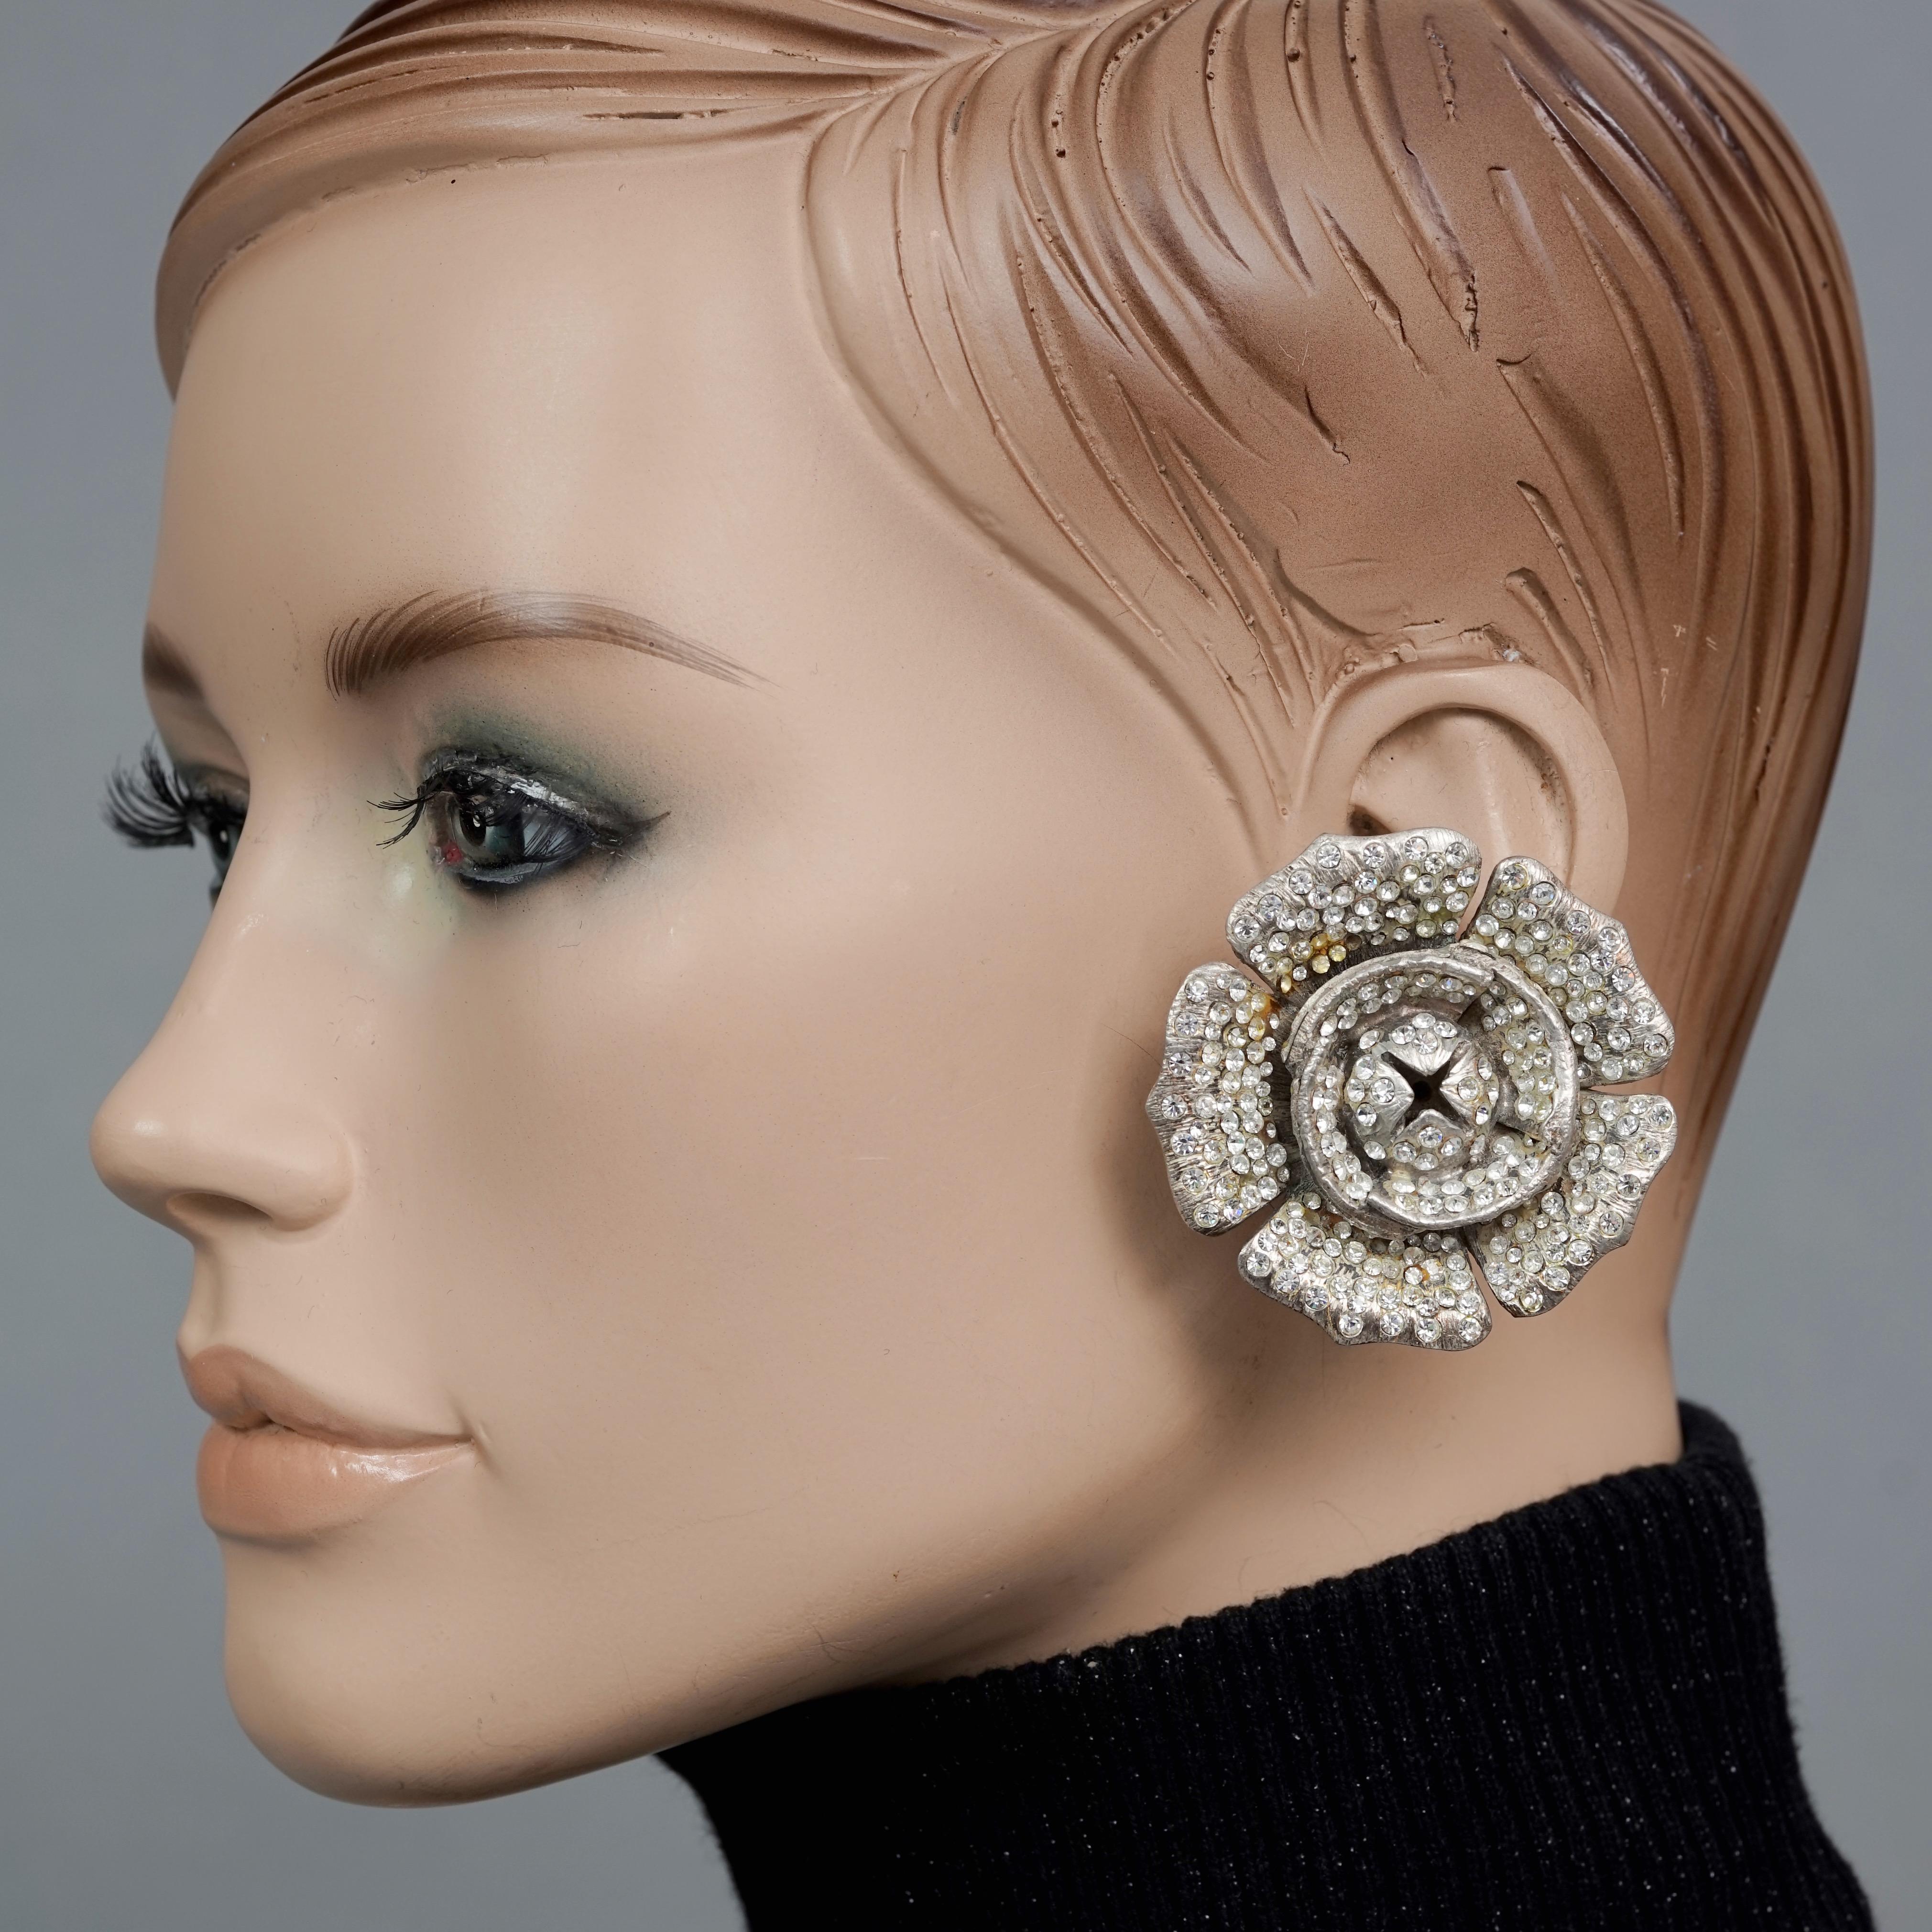 Vintage Massive LANVIN PARIS Flower Rhinestone Silver Earrings

MEASUREMENTS:
Height: 2 inches (5.1 cm)
Width: 2 inches (5.1 cm)
Weight per Earring: 54 grams

Features:
- 100% Authentic LANVIN PARIS.
- Massive 3 dimensional flower earrings studded